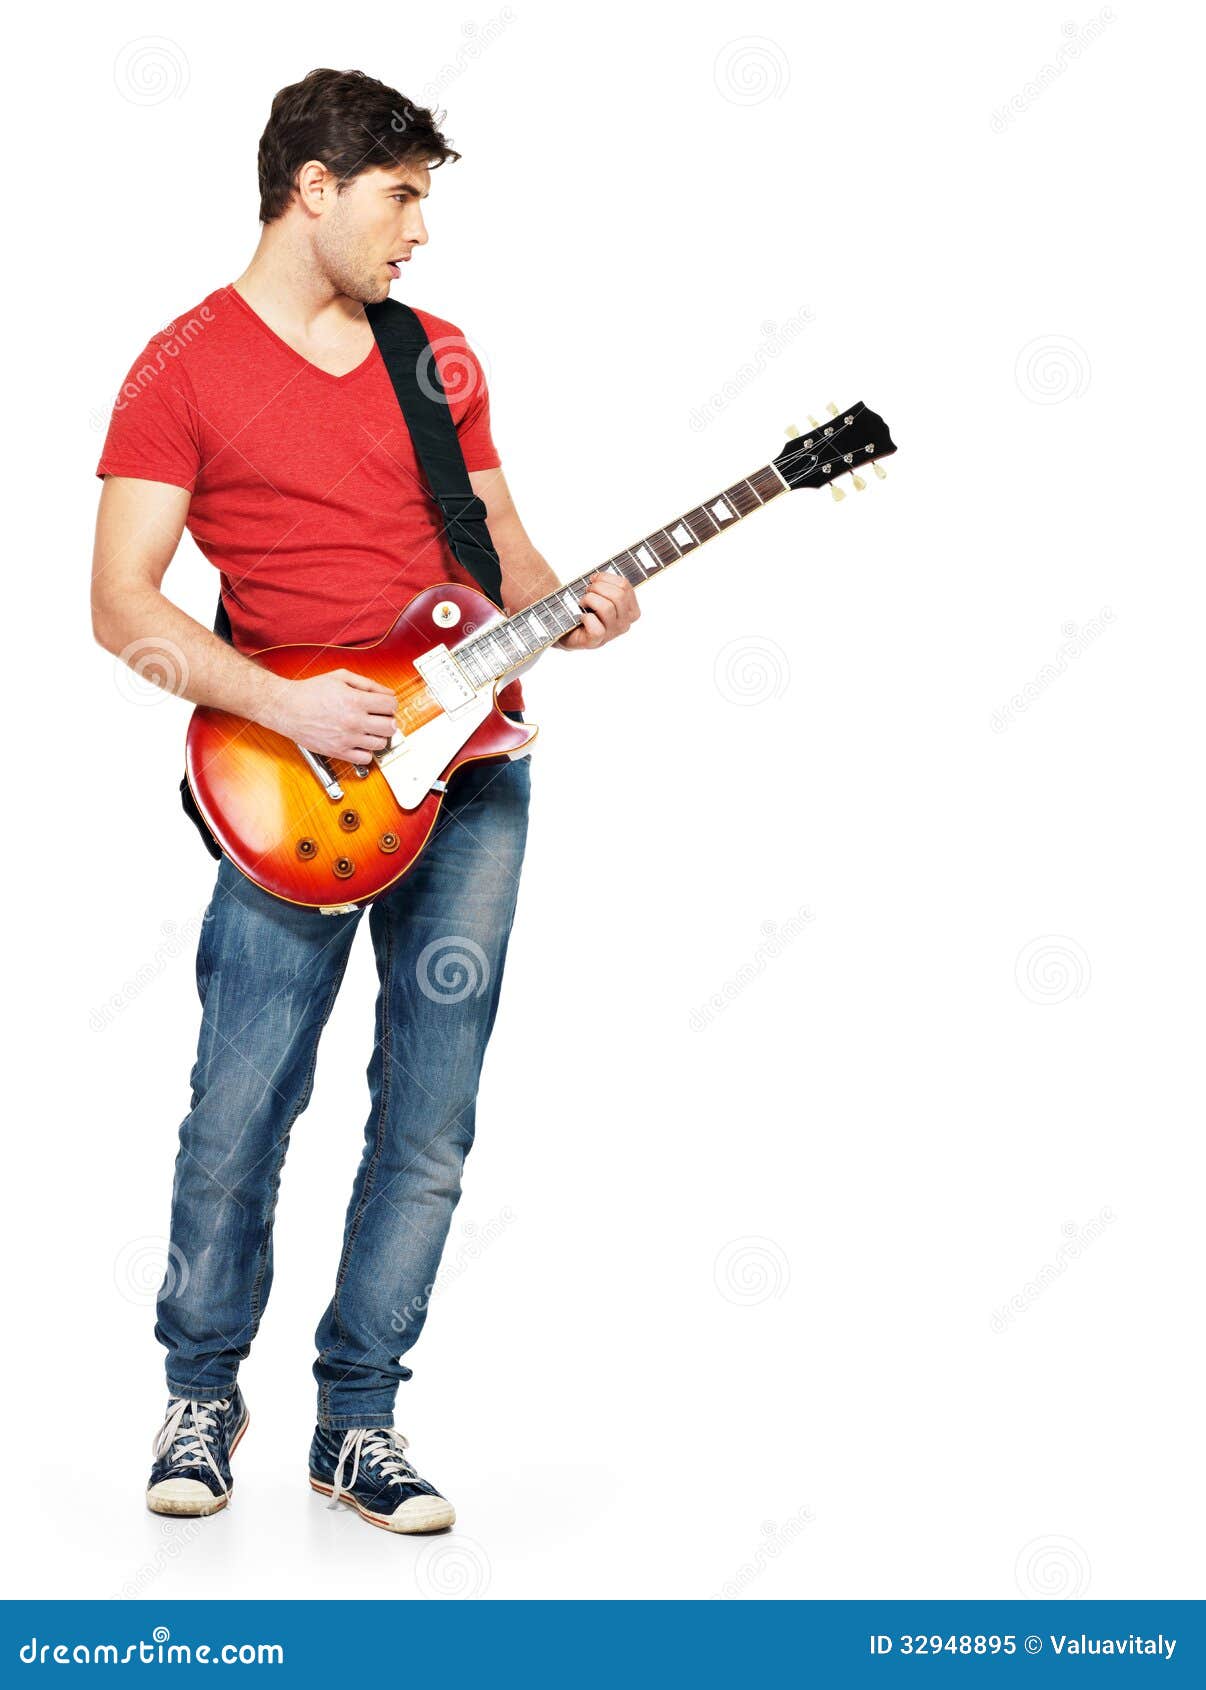 Cool Pose Of A Young Man Playing Electric Guitar Isolated On White  Background Stock Photo, Picture and Royalty Free Image. Image 40239981.